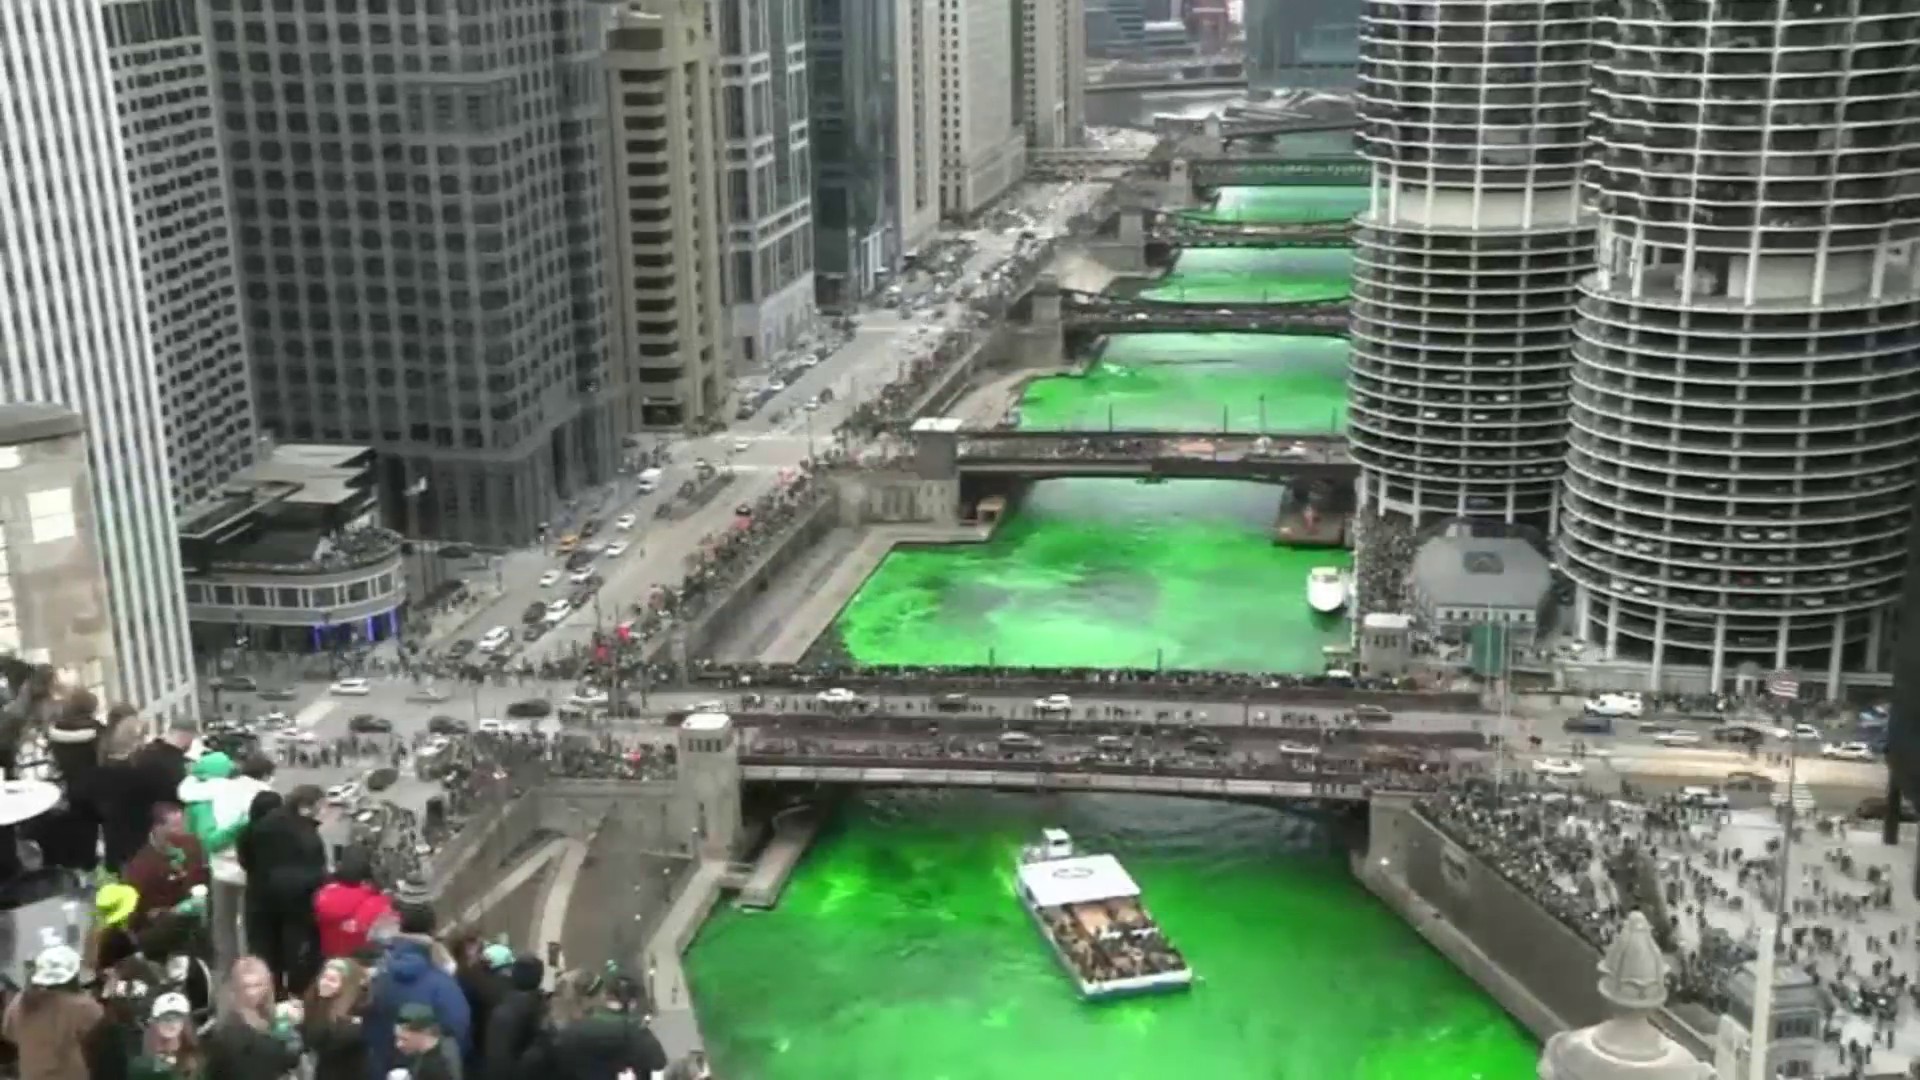 The History of St. Patrick's Day in Chicago